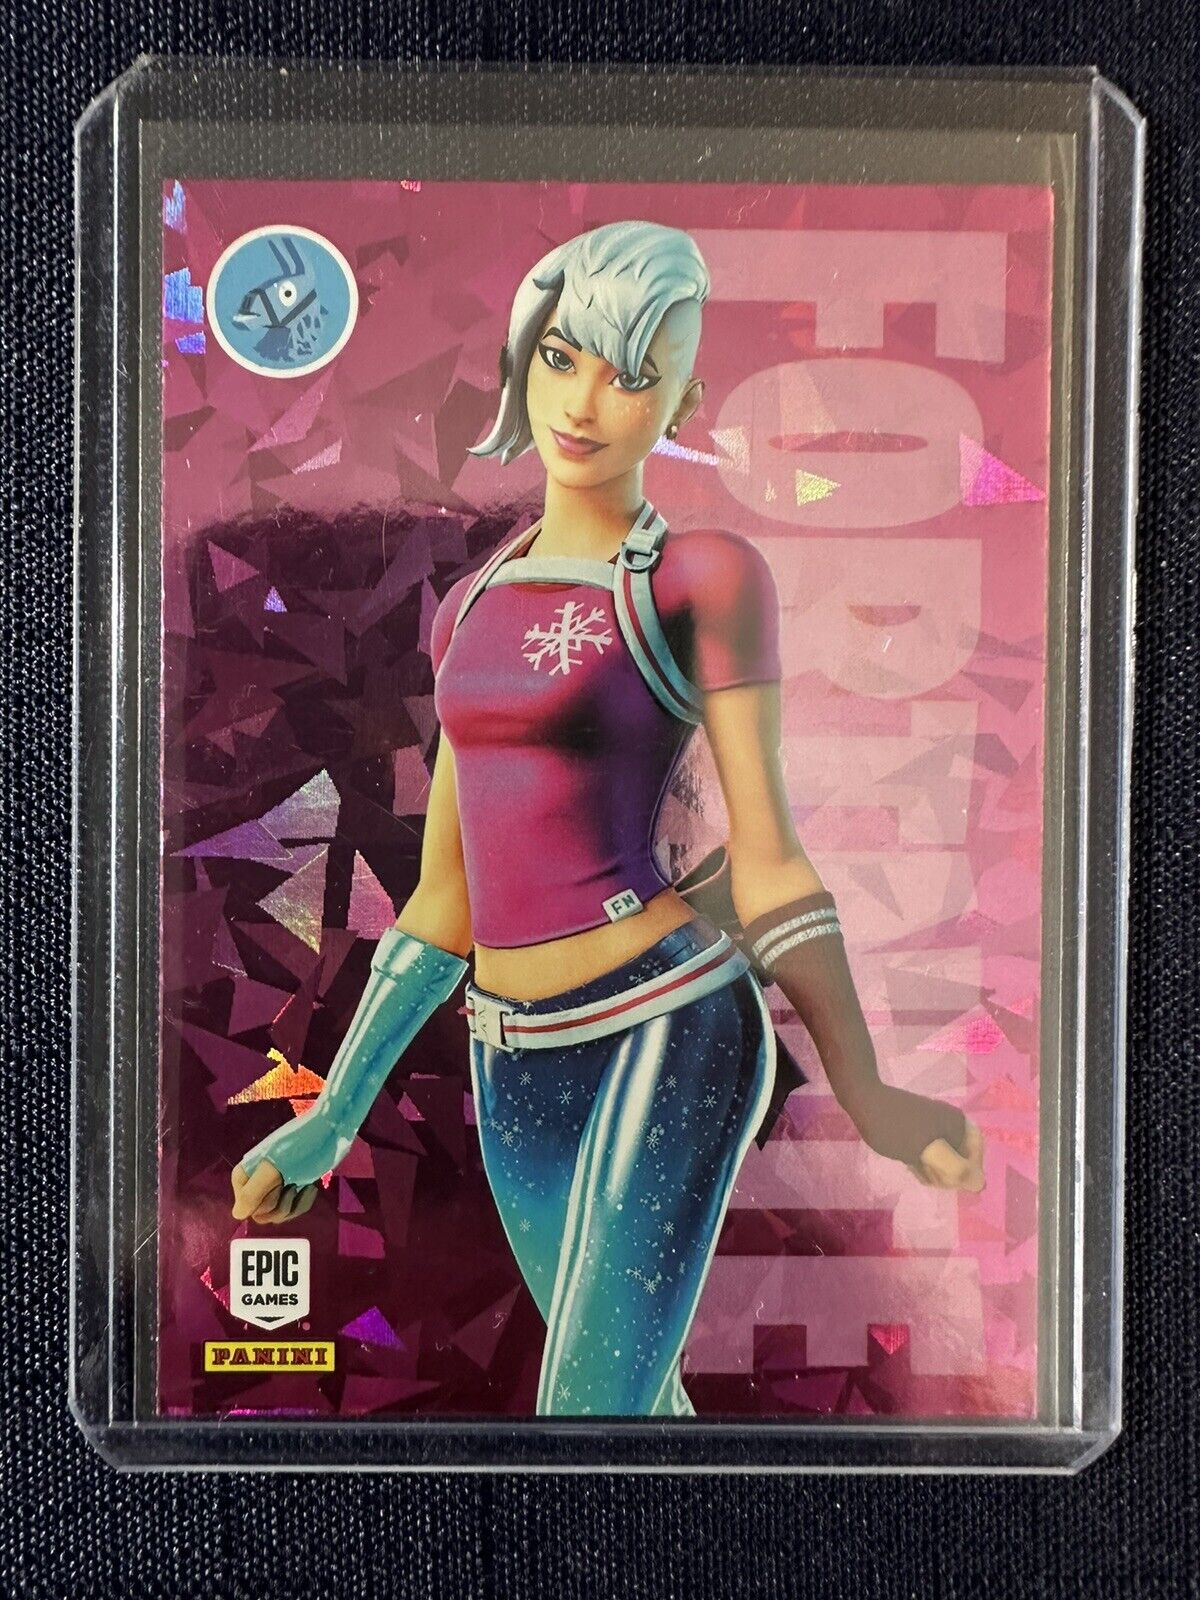 2021 Panini Fortnite Frosted Flurry Crystal Shard Cracked Ice Series 3 S3 USA